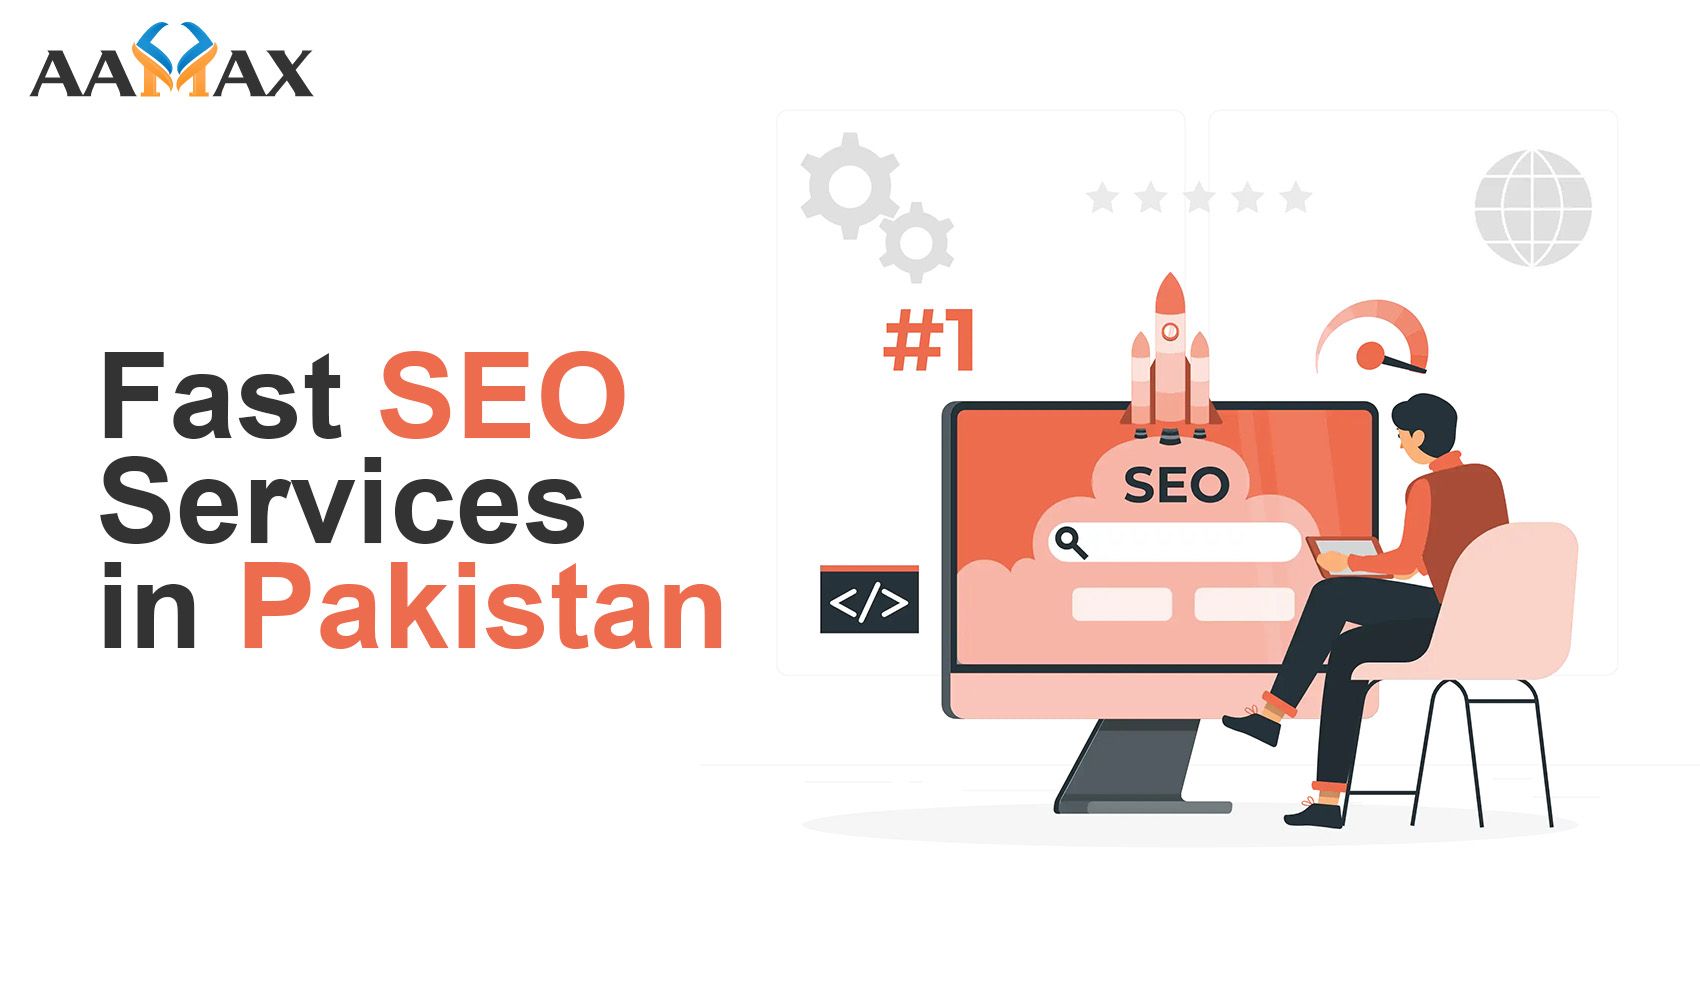 Fast SEO Services in Pakistan